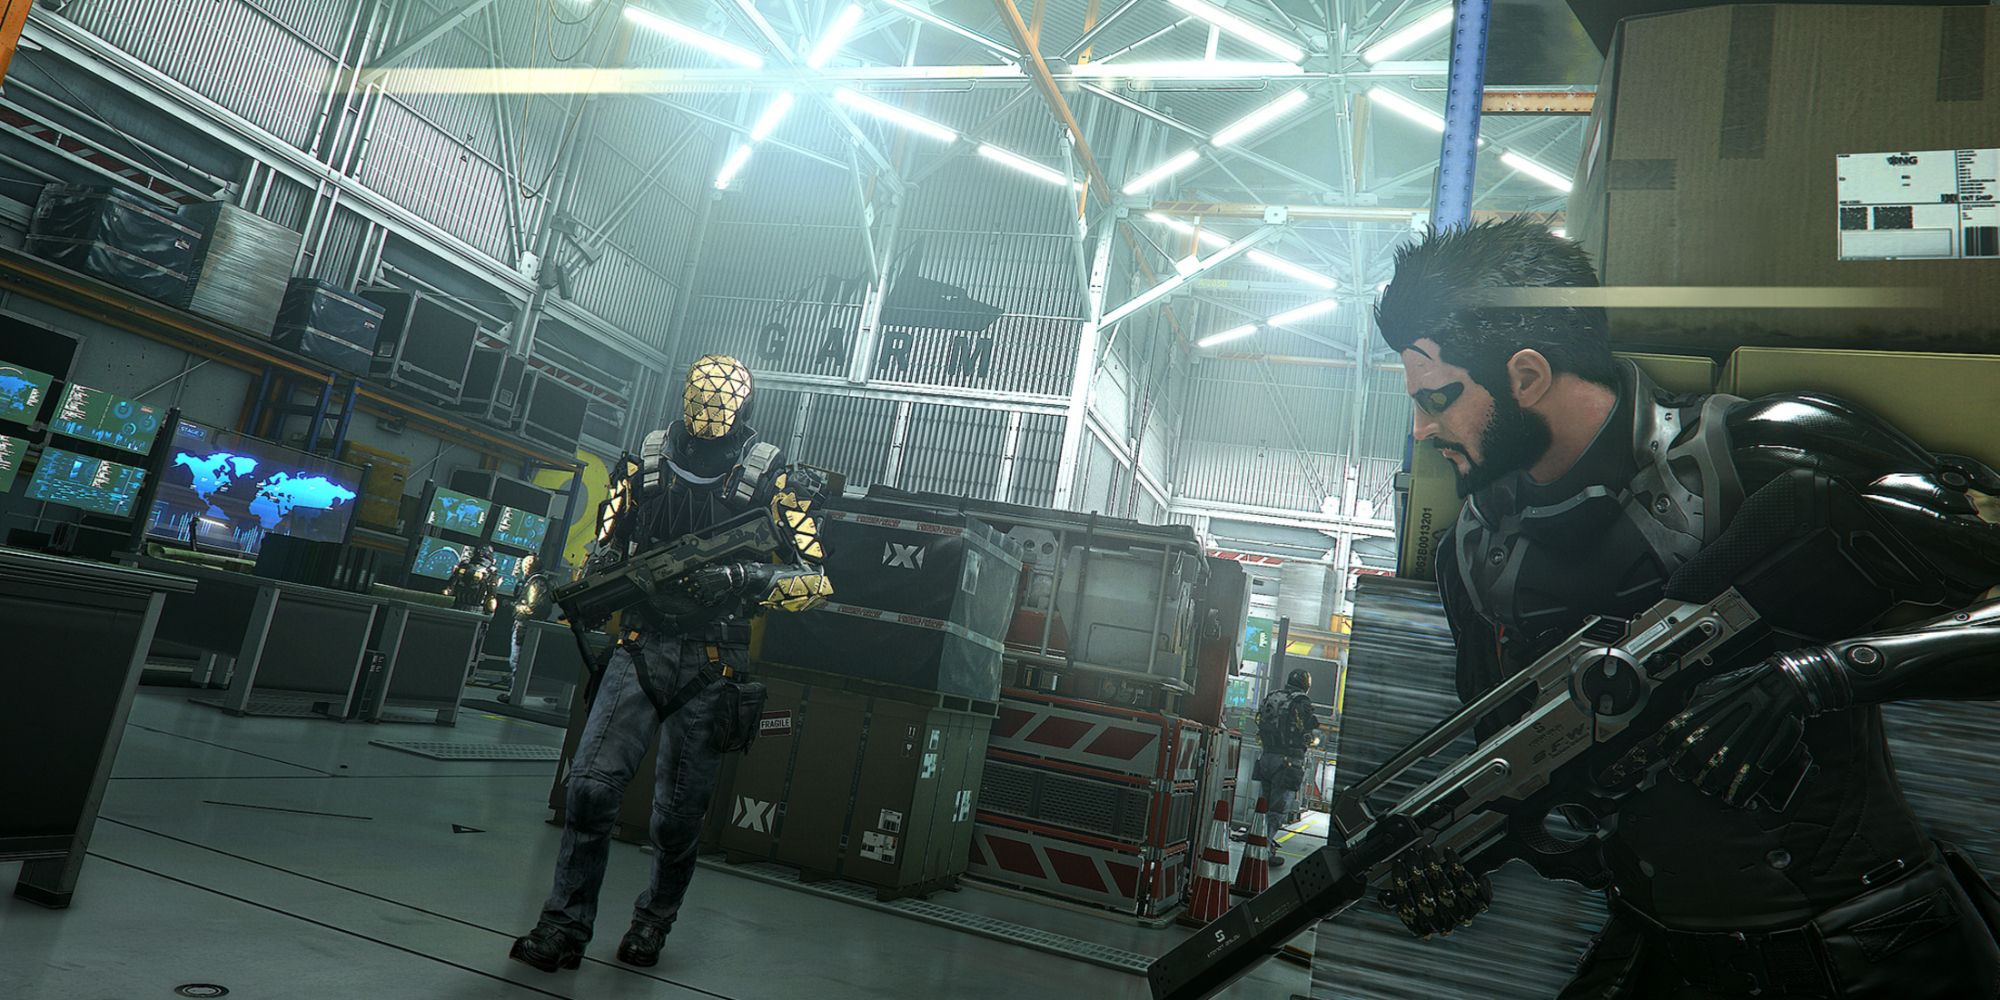 Deus Ex Mankind Divided features a fantastic array of stealth abilities